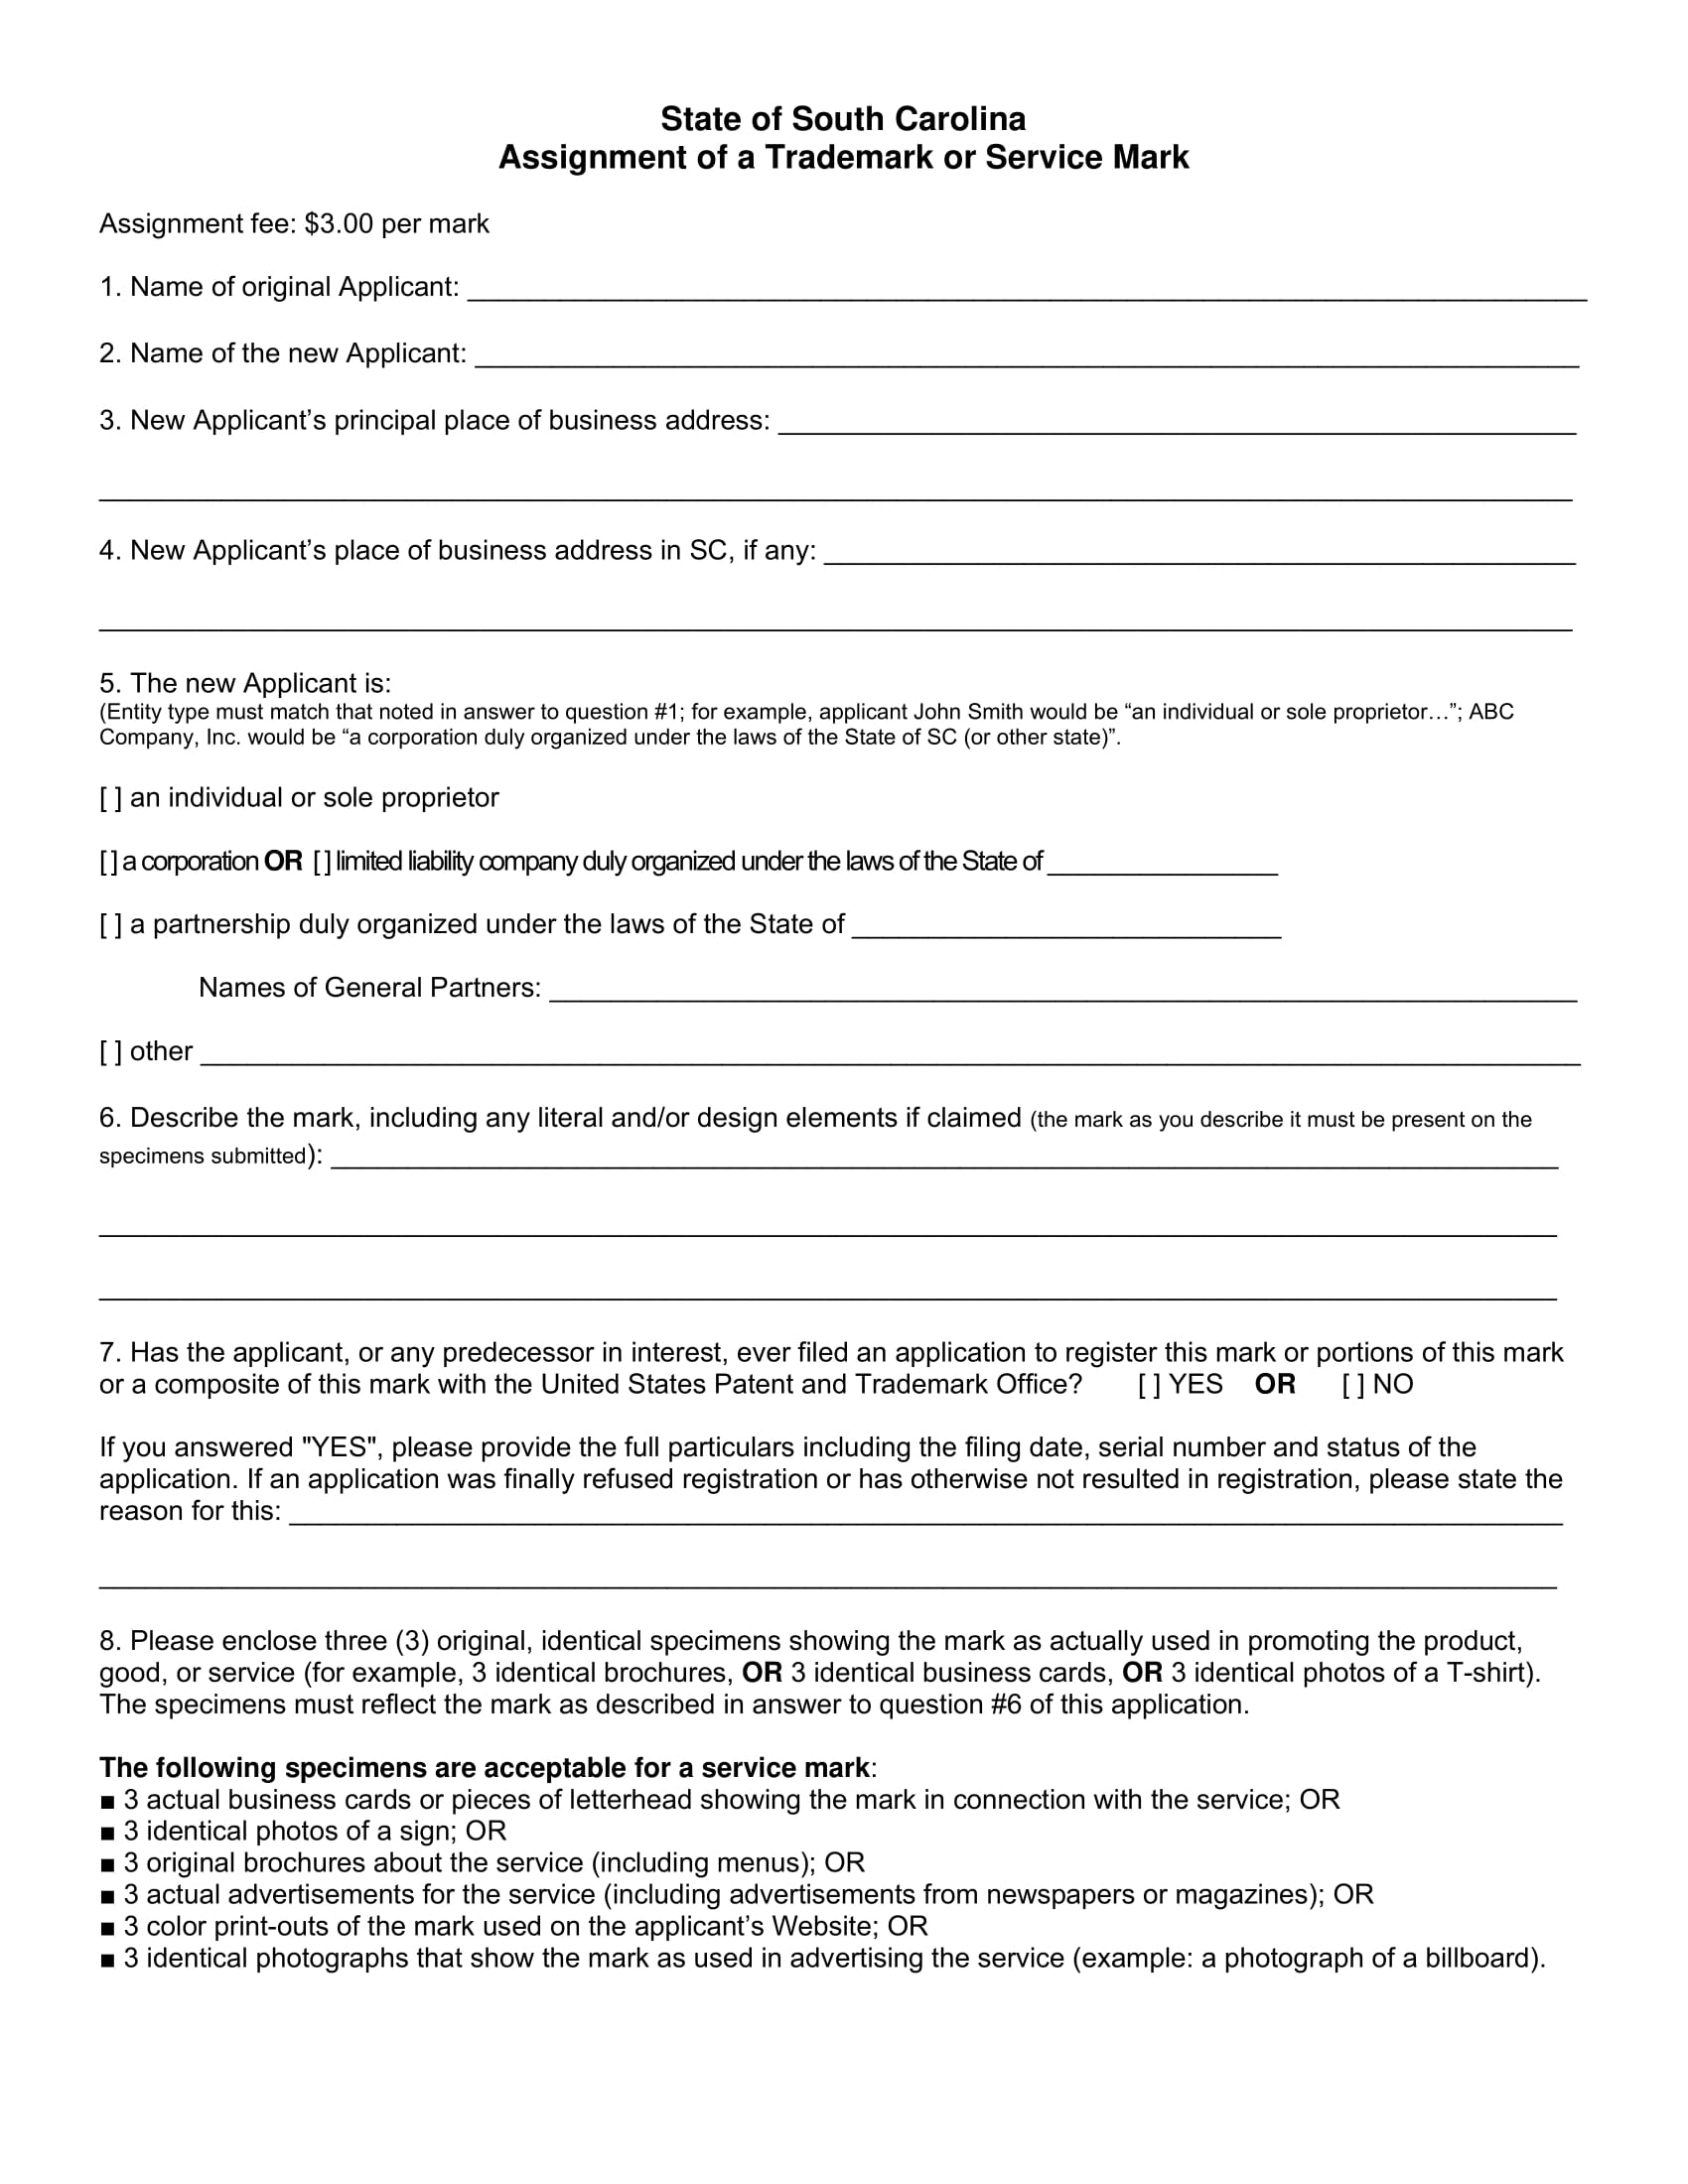 fillable trademark assignment form 1